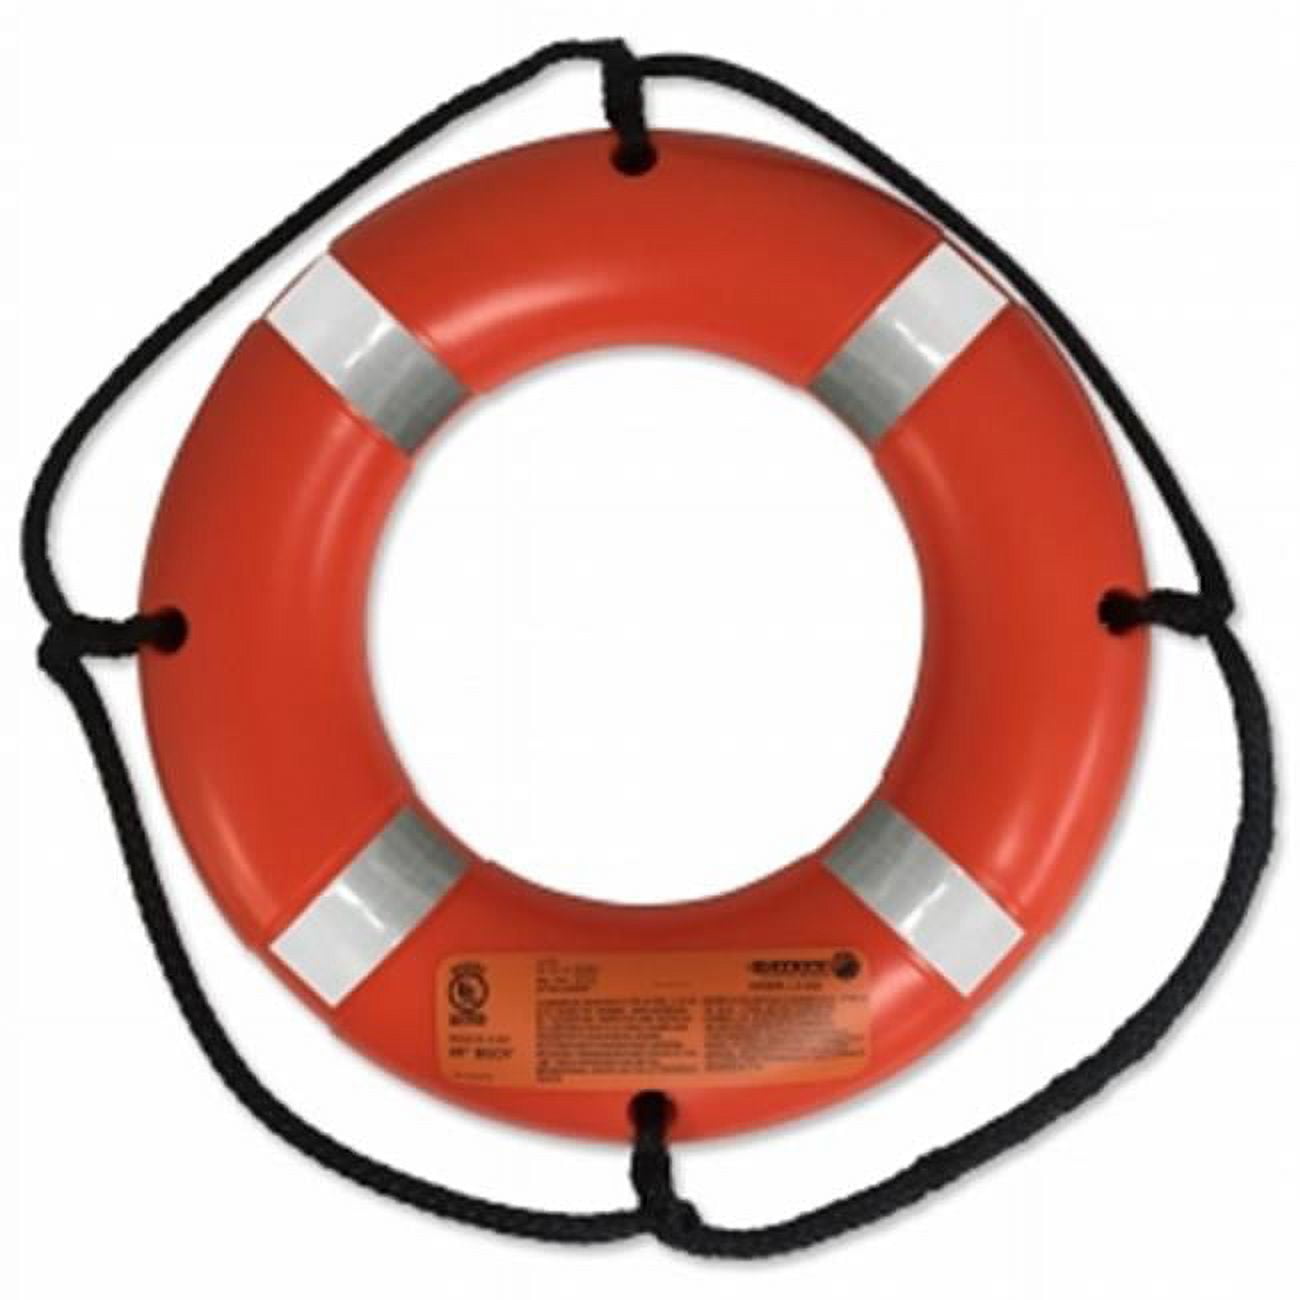 Picture of Datrex DX0200RD 20 in. Lifering with Tape, Orange - USCG